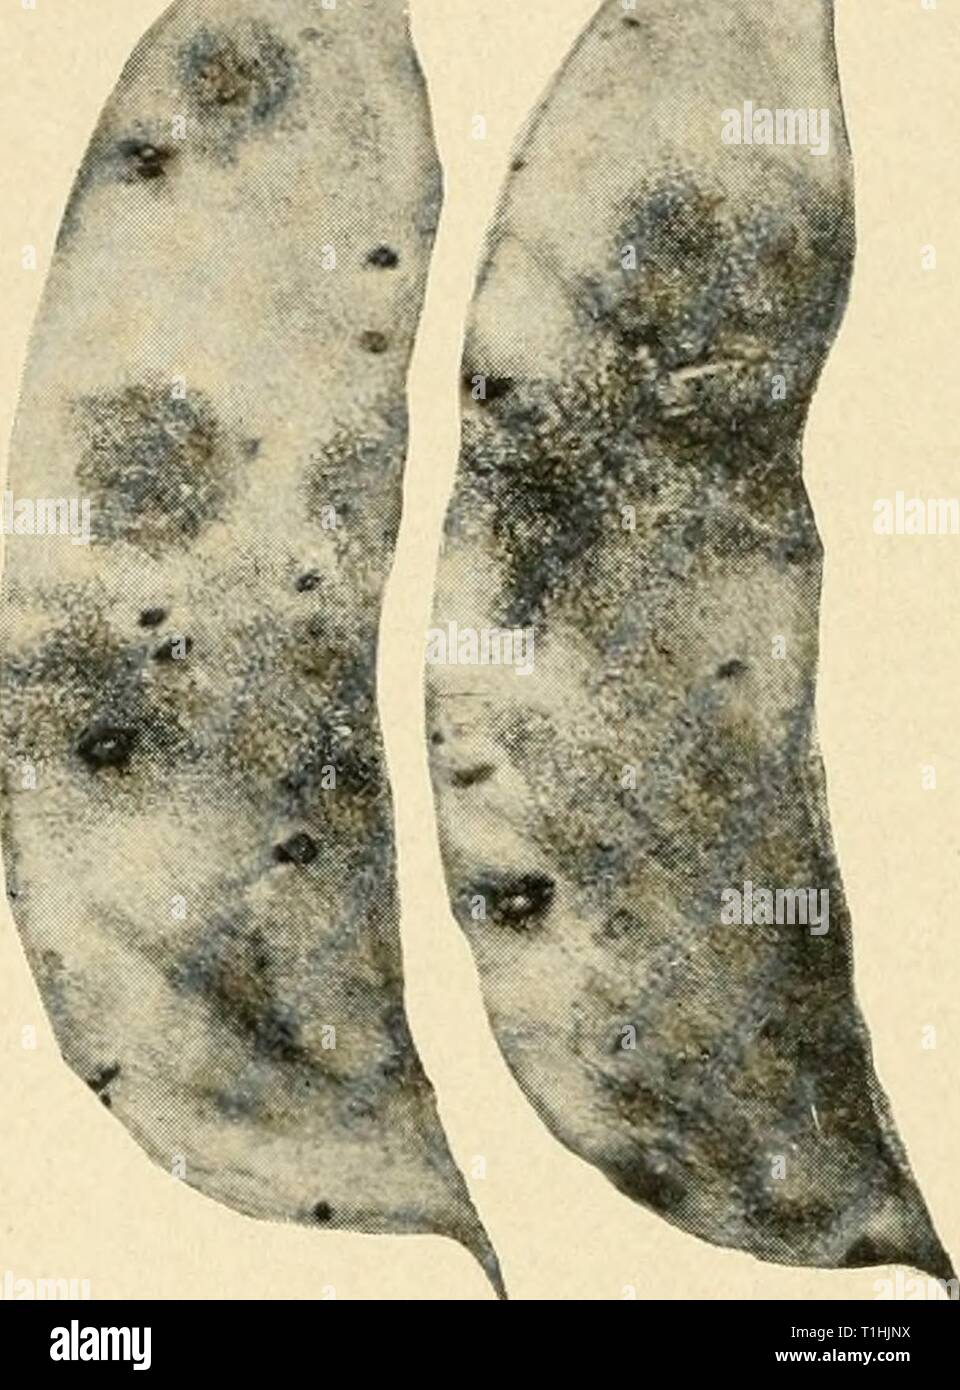 Diseases of economic plants (1910) Diseases of economic plants  diseasesofeconom00stev Year: 1910  206 DISEASES OF ECONOMIC PLANTS is destructive upon the lima bean, producing upon pods and leaves large, brown patches, with the pycnidia ar- ranged in concentric circles. When the disease is very prevalent, the pods fail to V mature their seeds. Spraying with Bordeaux mixture is recommended. Powdery mildew {Ery- siphe polygoni DC). — The characters of the powdery mildews as described for the grape apply here suffi- ciently to serve for recog- nition purposes. This dis- ease is not usually seriou Stock Photo